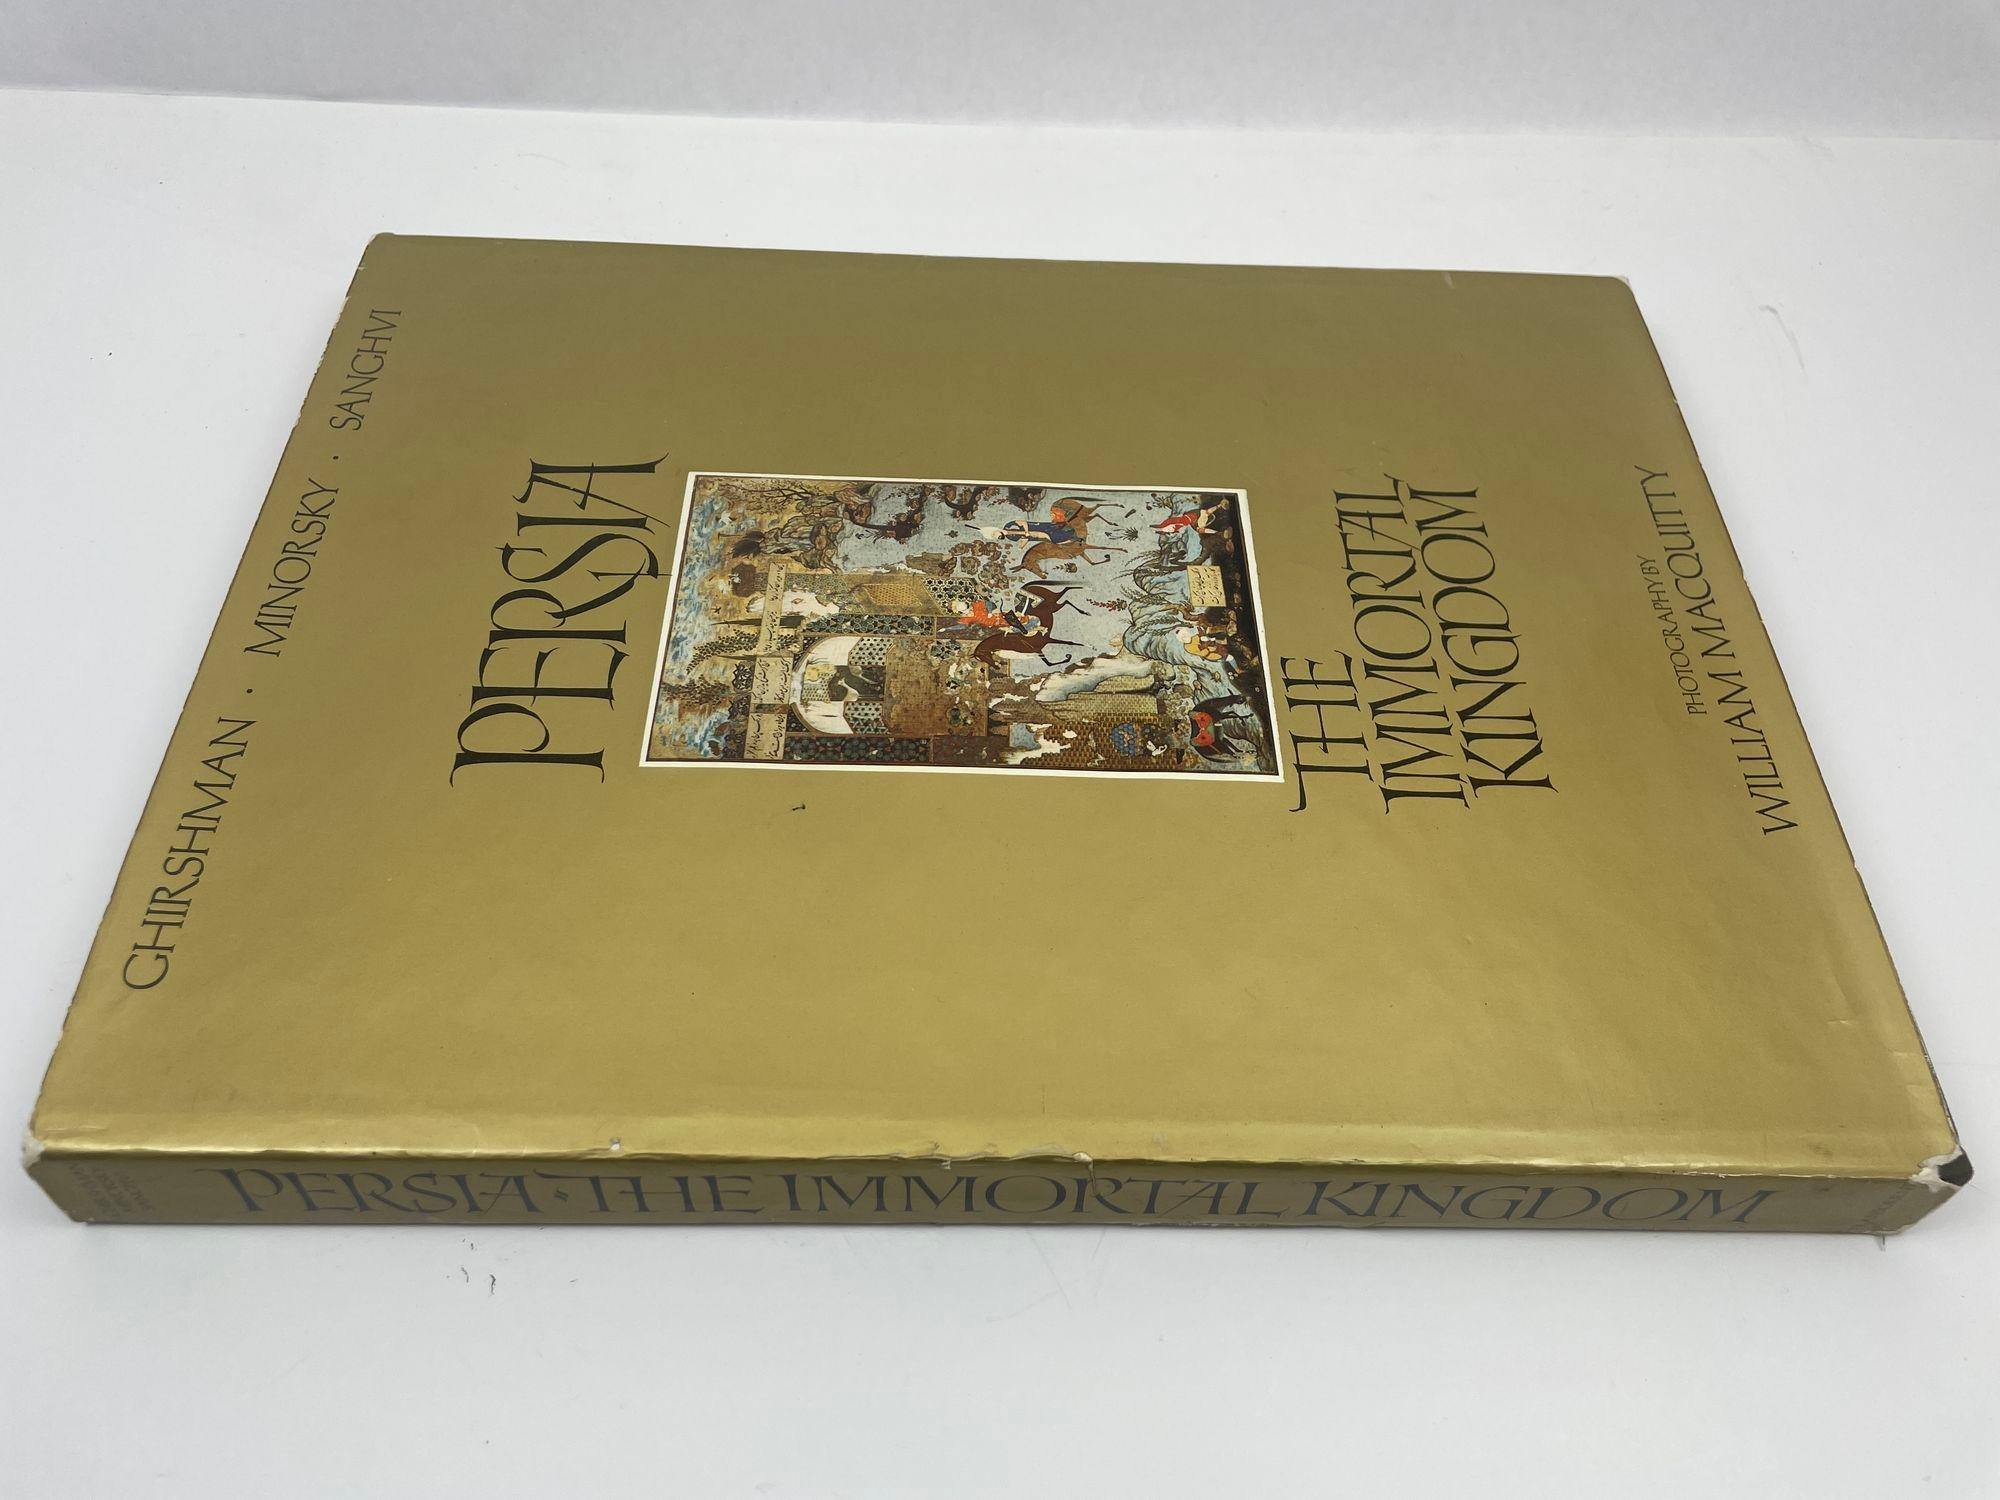 20th Century Persia The Immortal Kingdom by Ghirshman Minorsky Sanghvi 1971 For Sale